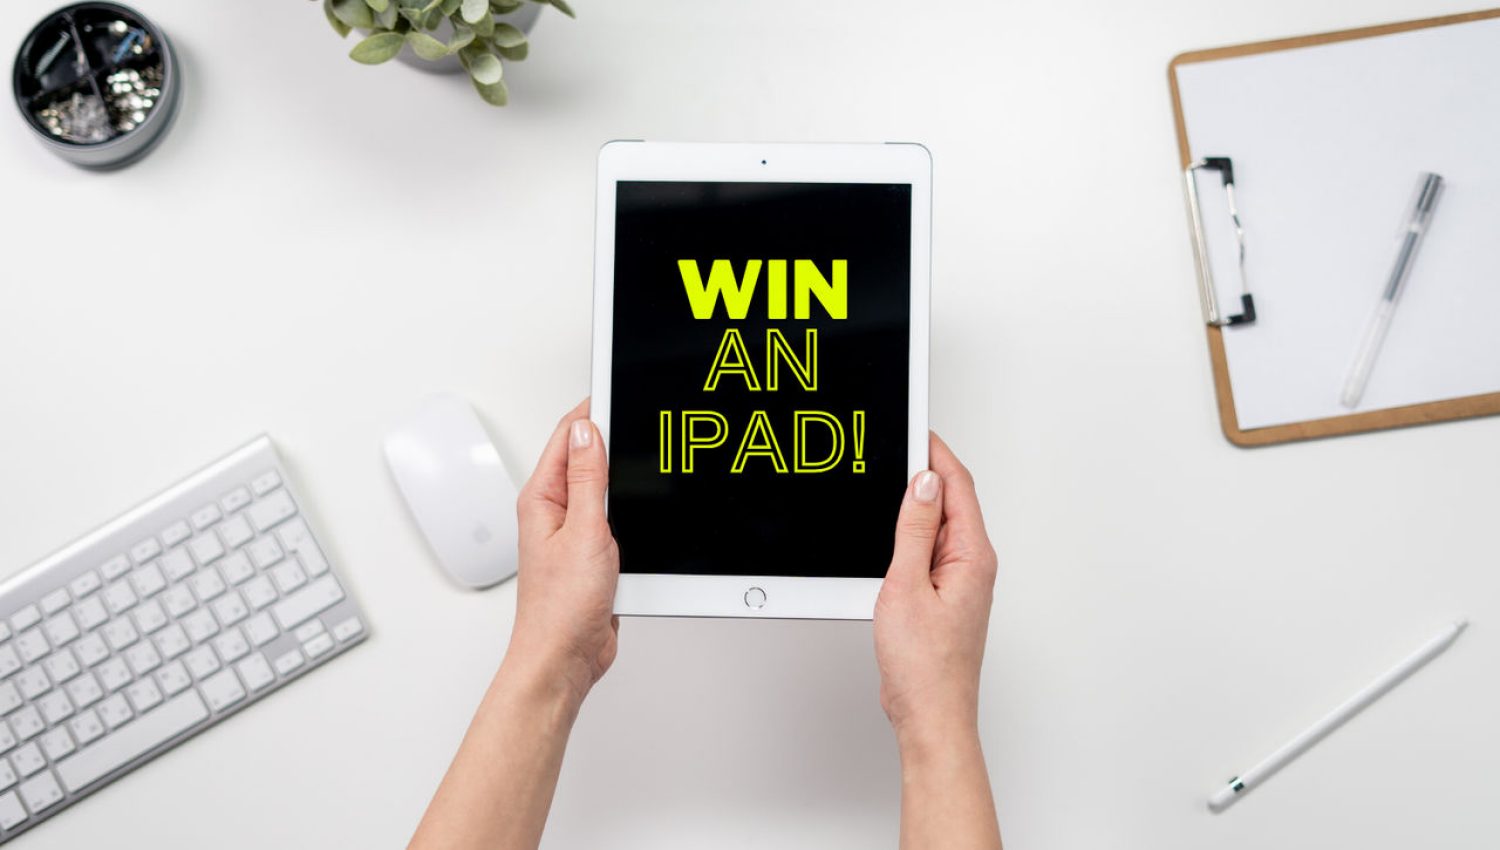 Take the quiz, and enter to win an ipad!